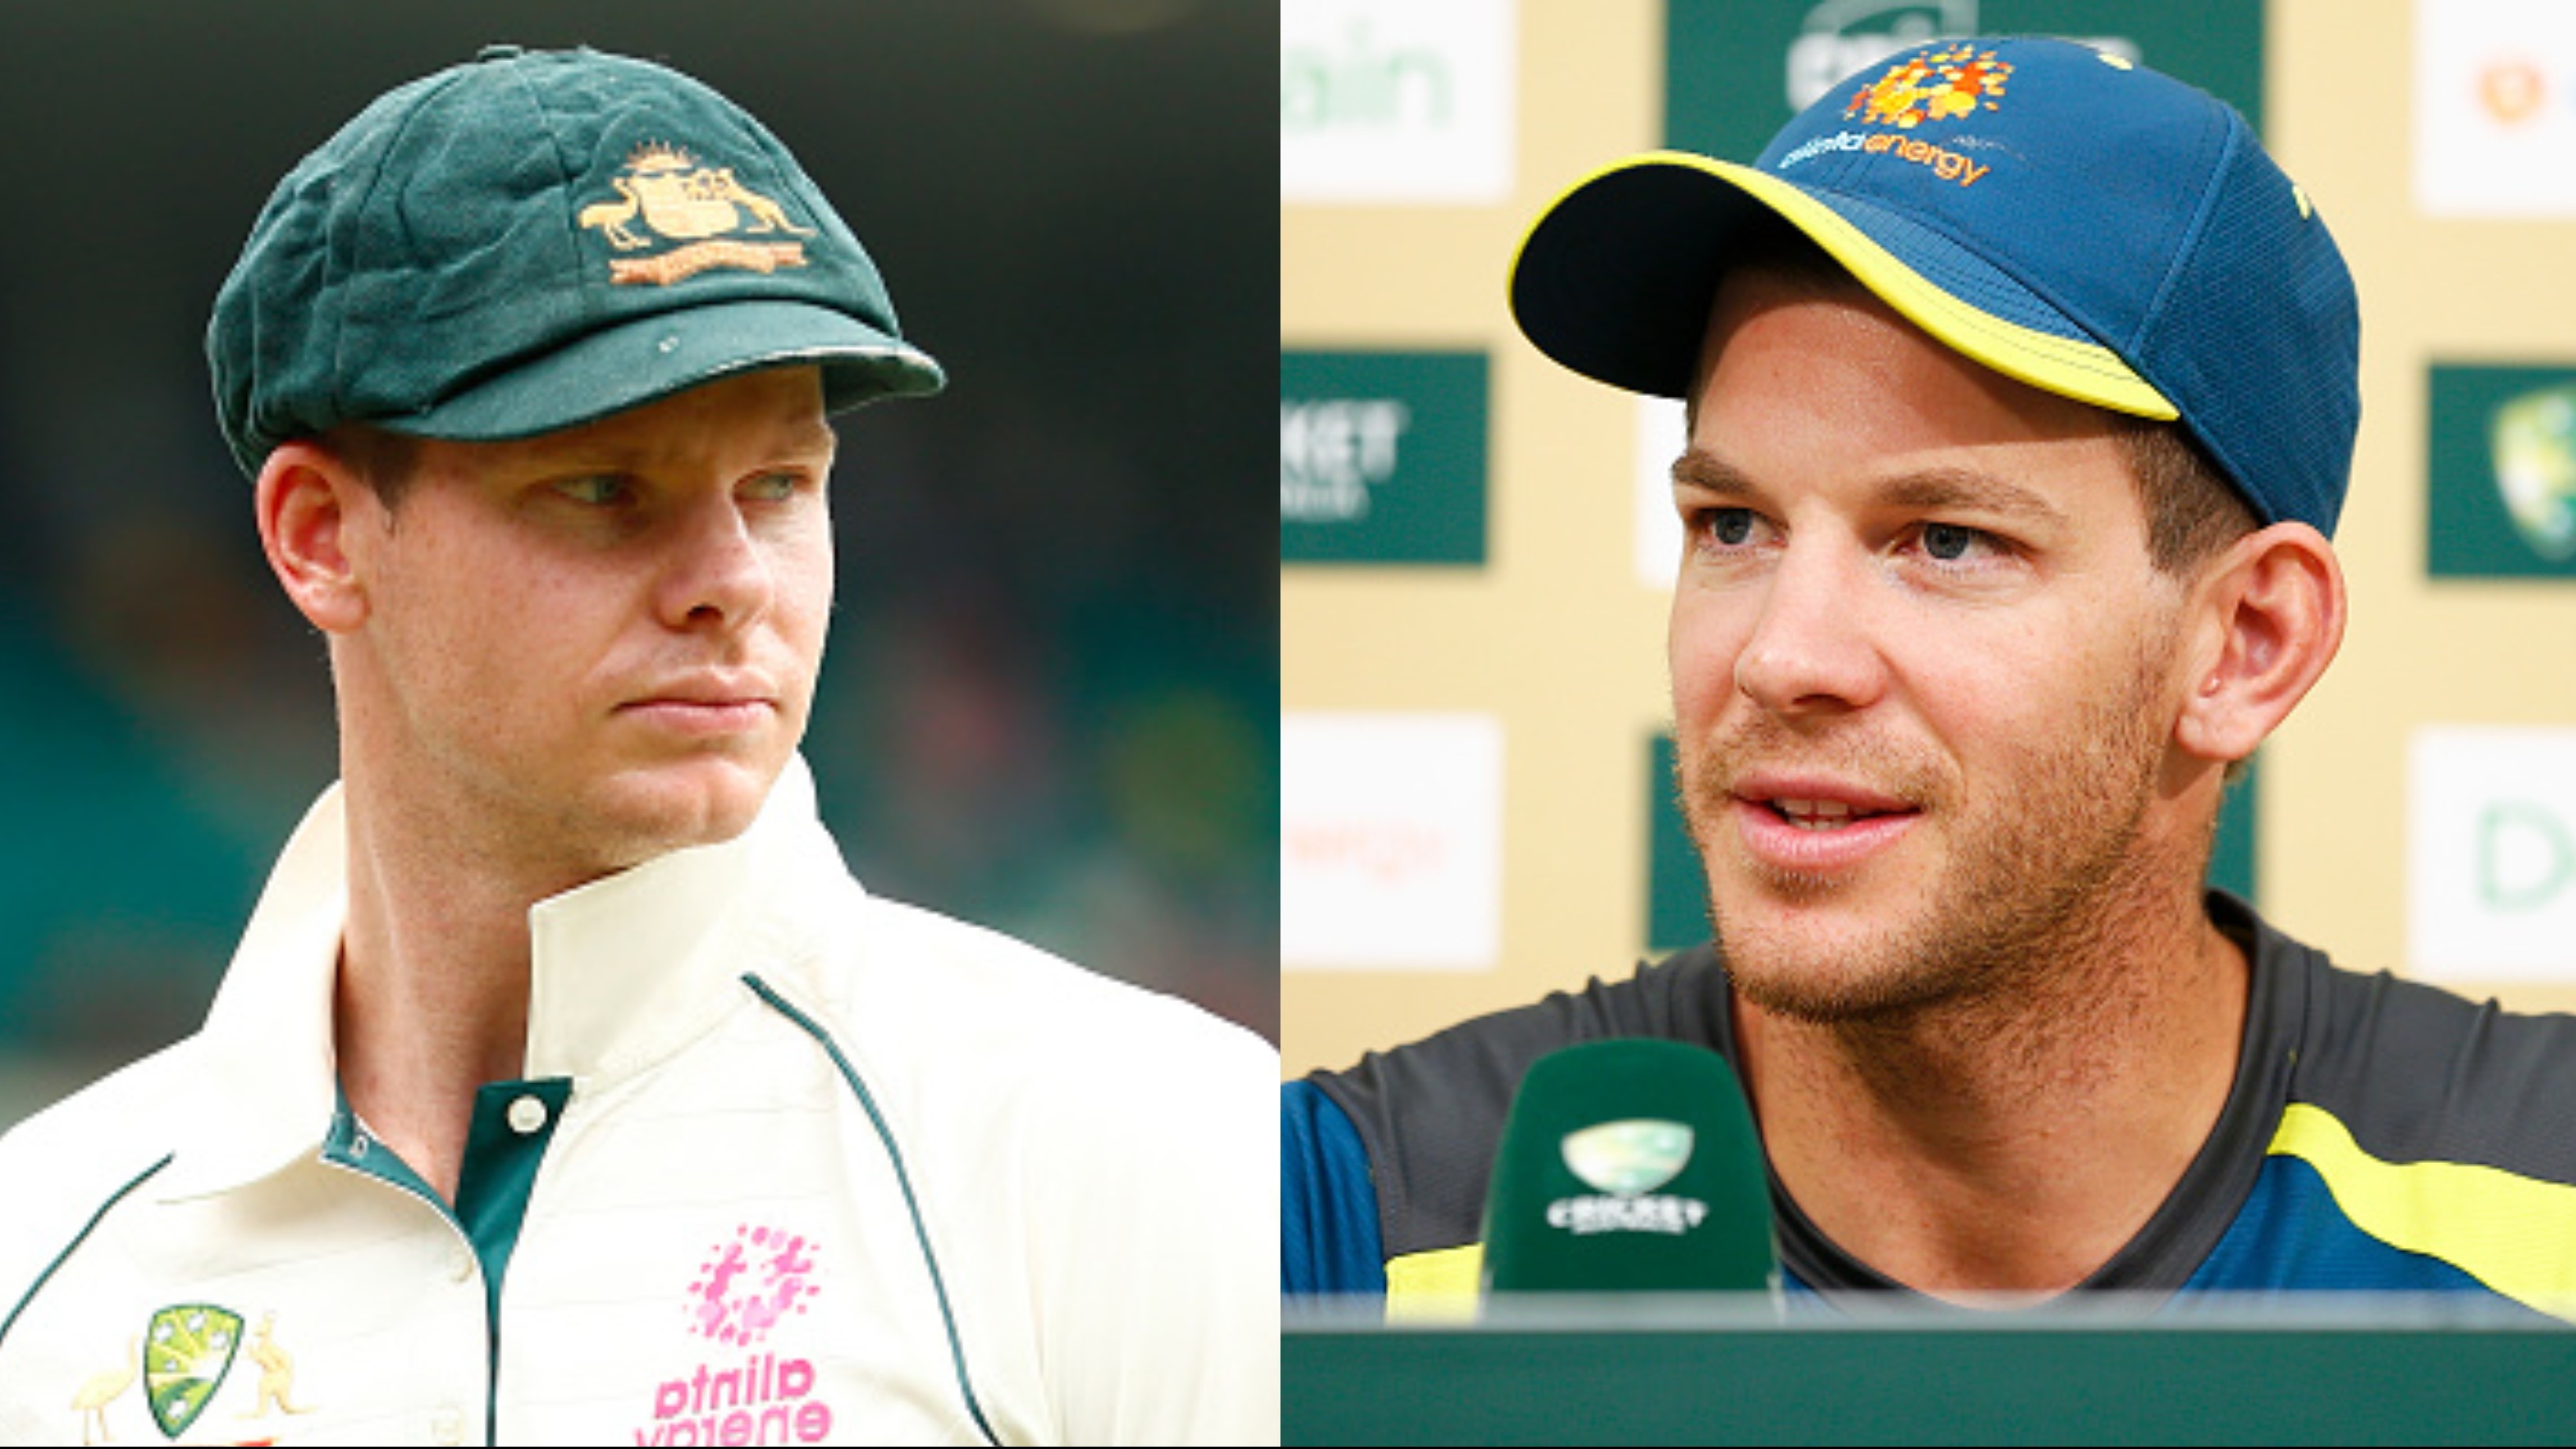 Will fully support Steve Smith as captain, if he wants to do it again, says Tim Paine